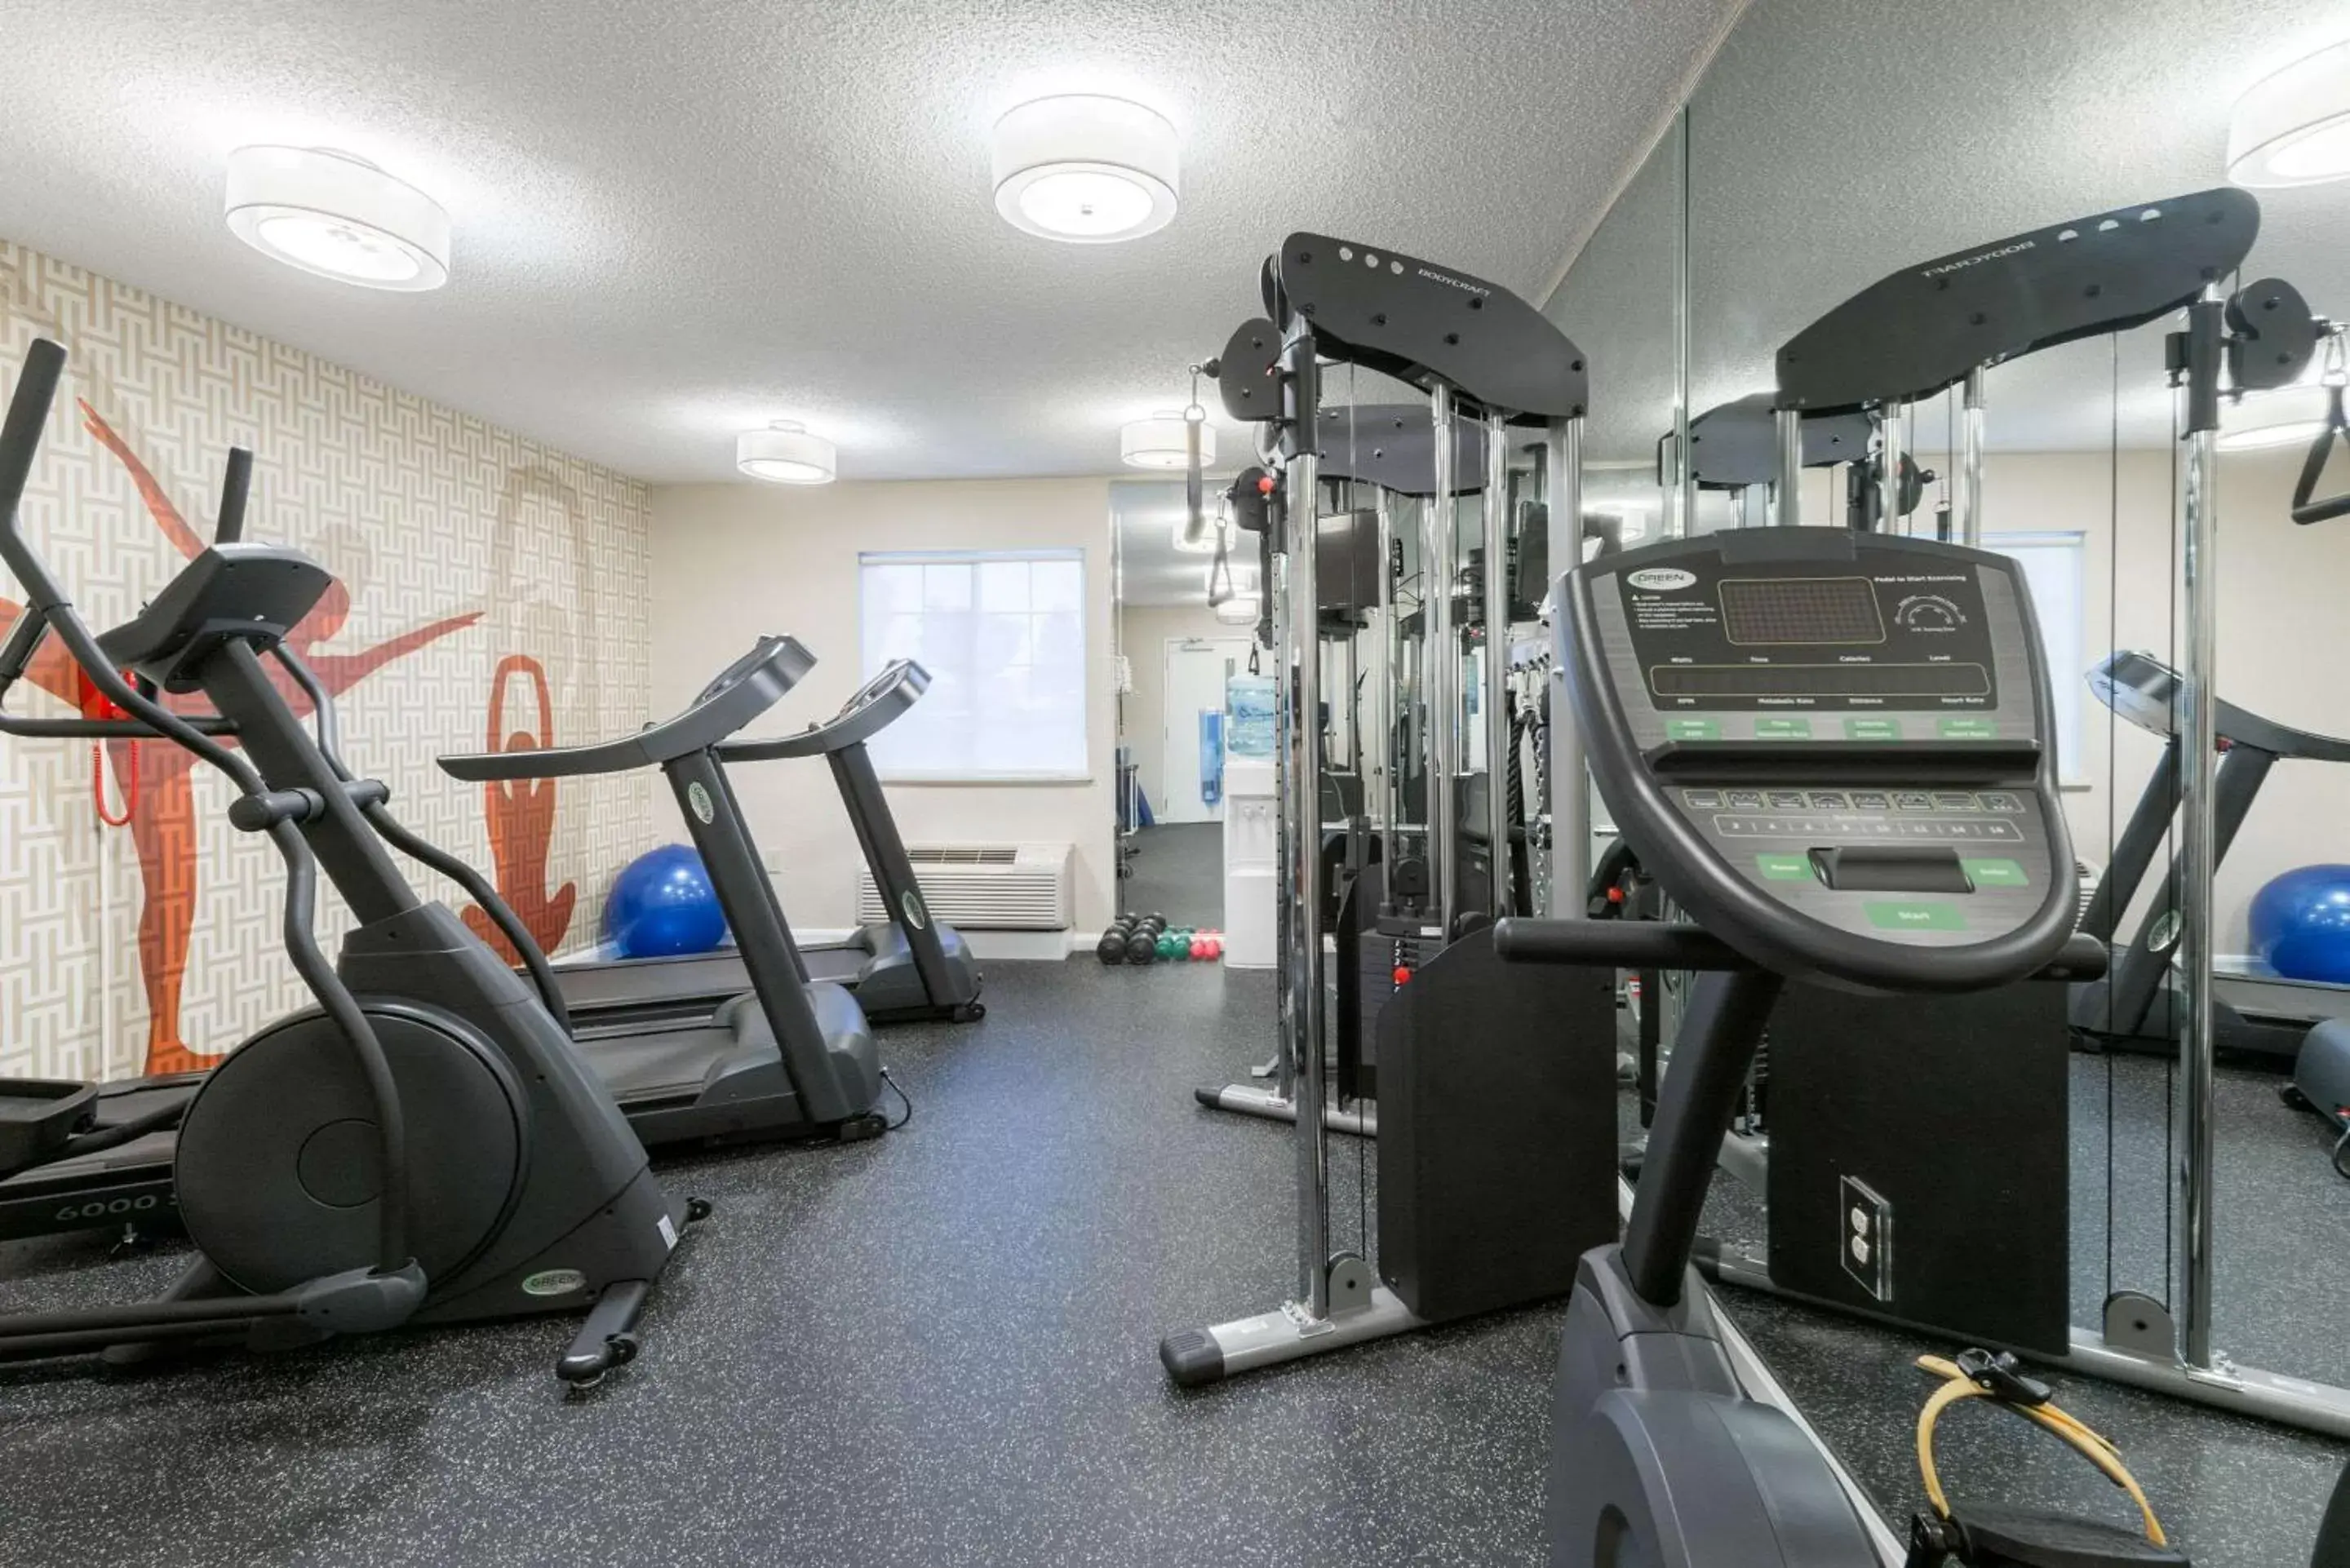 Fitness centre/facilities, Fitness Center/Facilities in MainStay Suites Louisville Jeffersontown